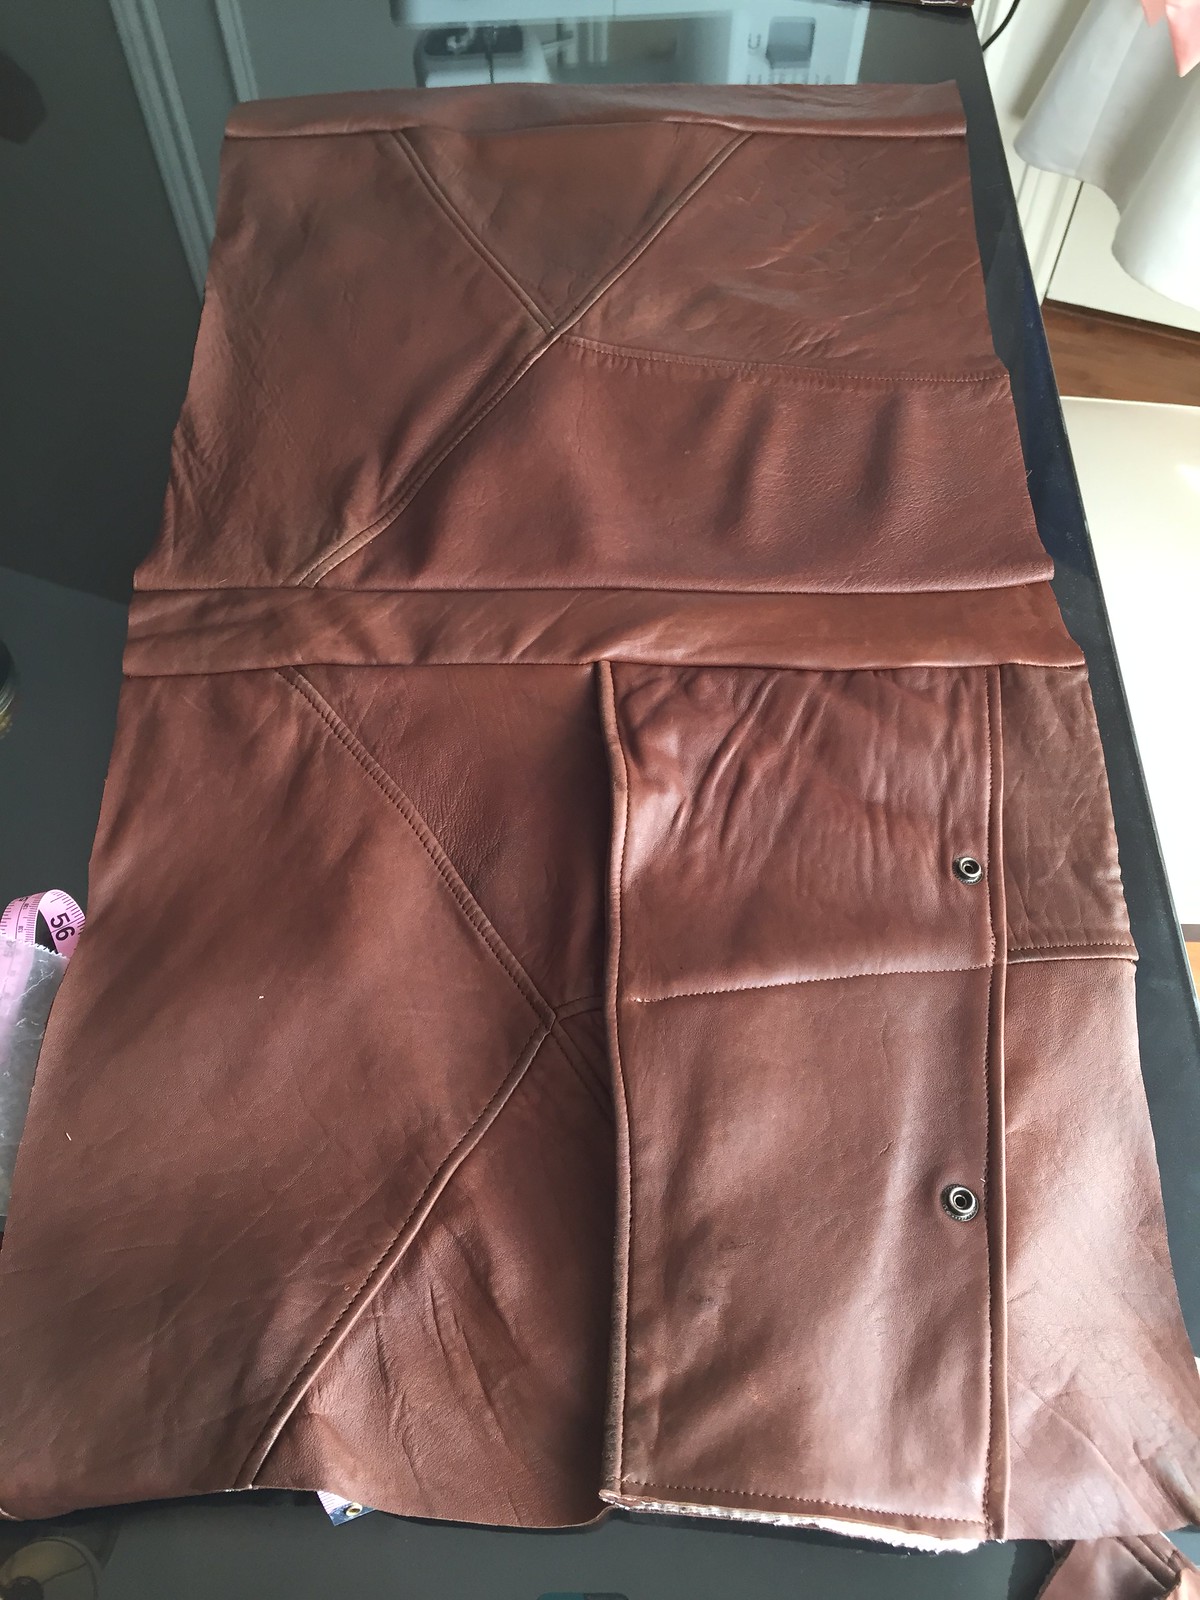 Recycled Leather Fold-Over Bag - In Progress